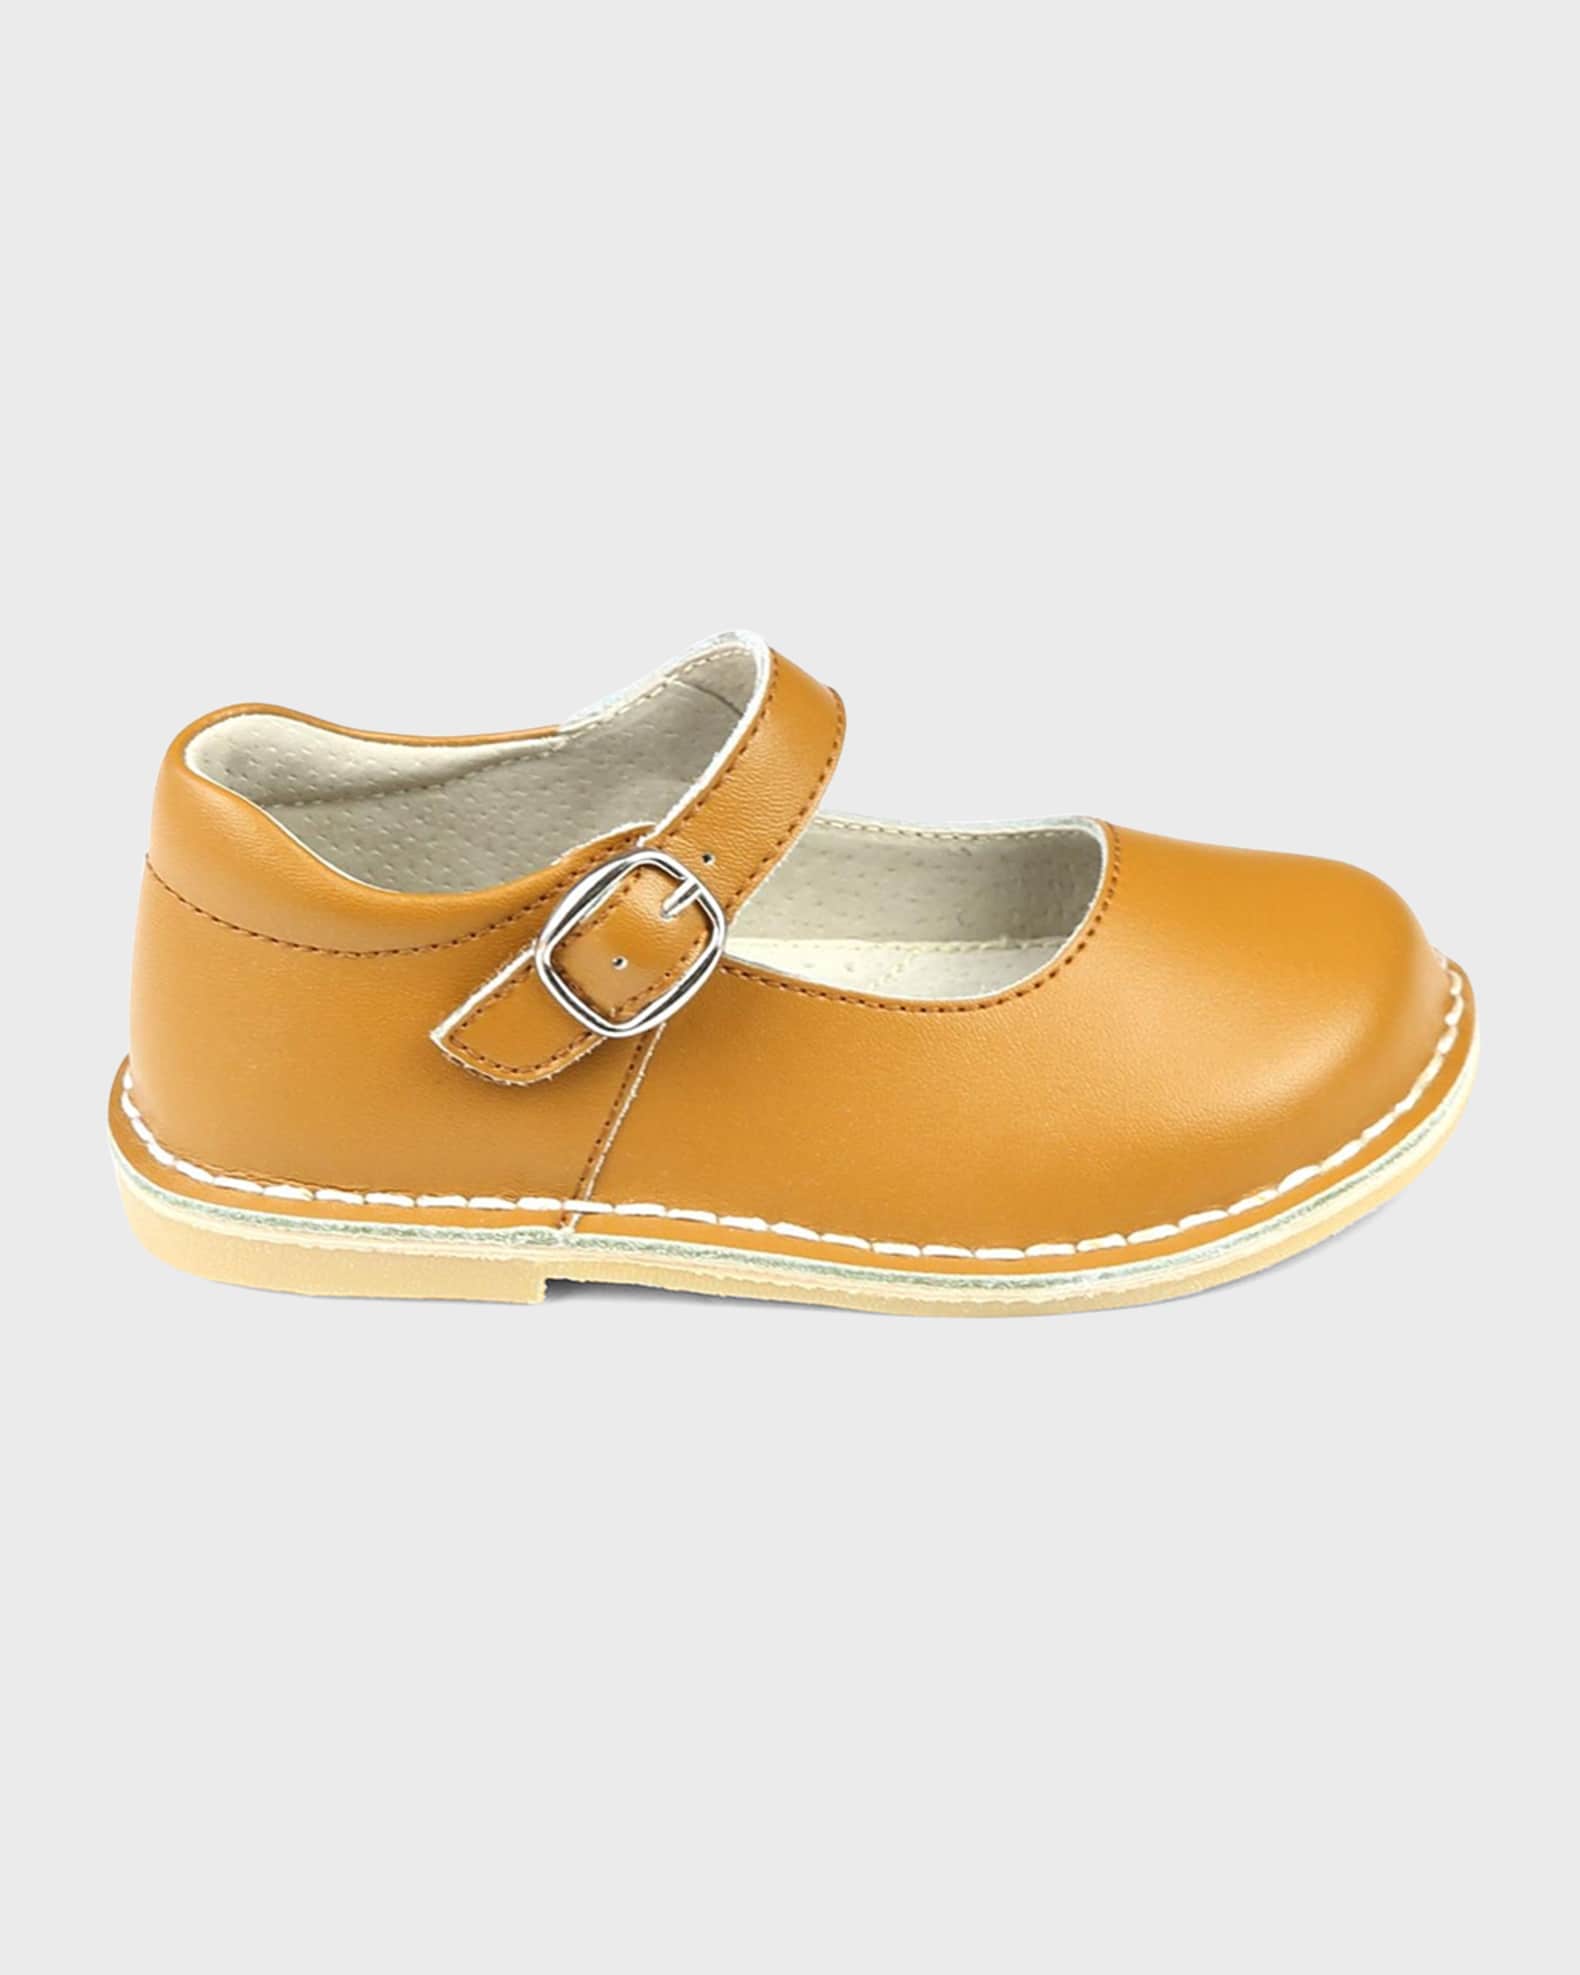 L'Amour Girl's Grace Mary Jane Leather Shoes, Baby/Toddlers/Kids | Marcus